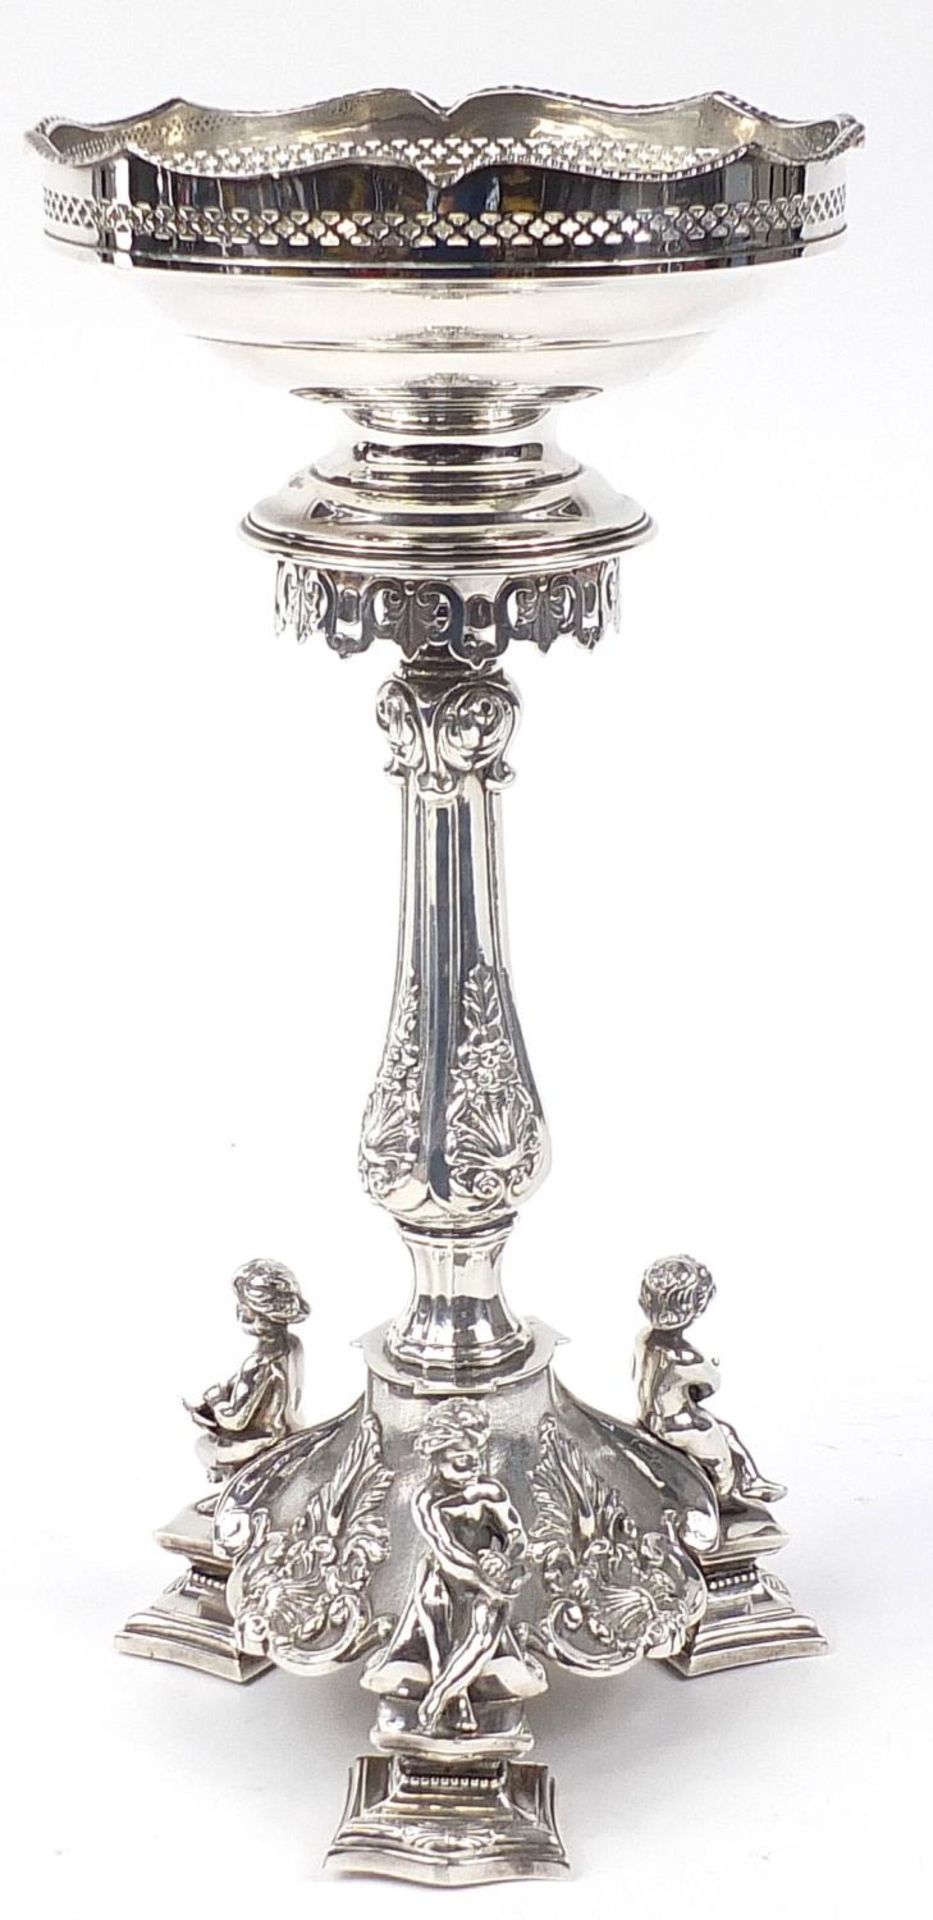 Silver plated centrepiece surmounted with three nude children, 40.5cm high - Image 2 of 3